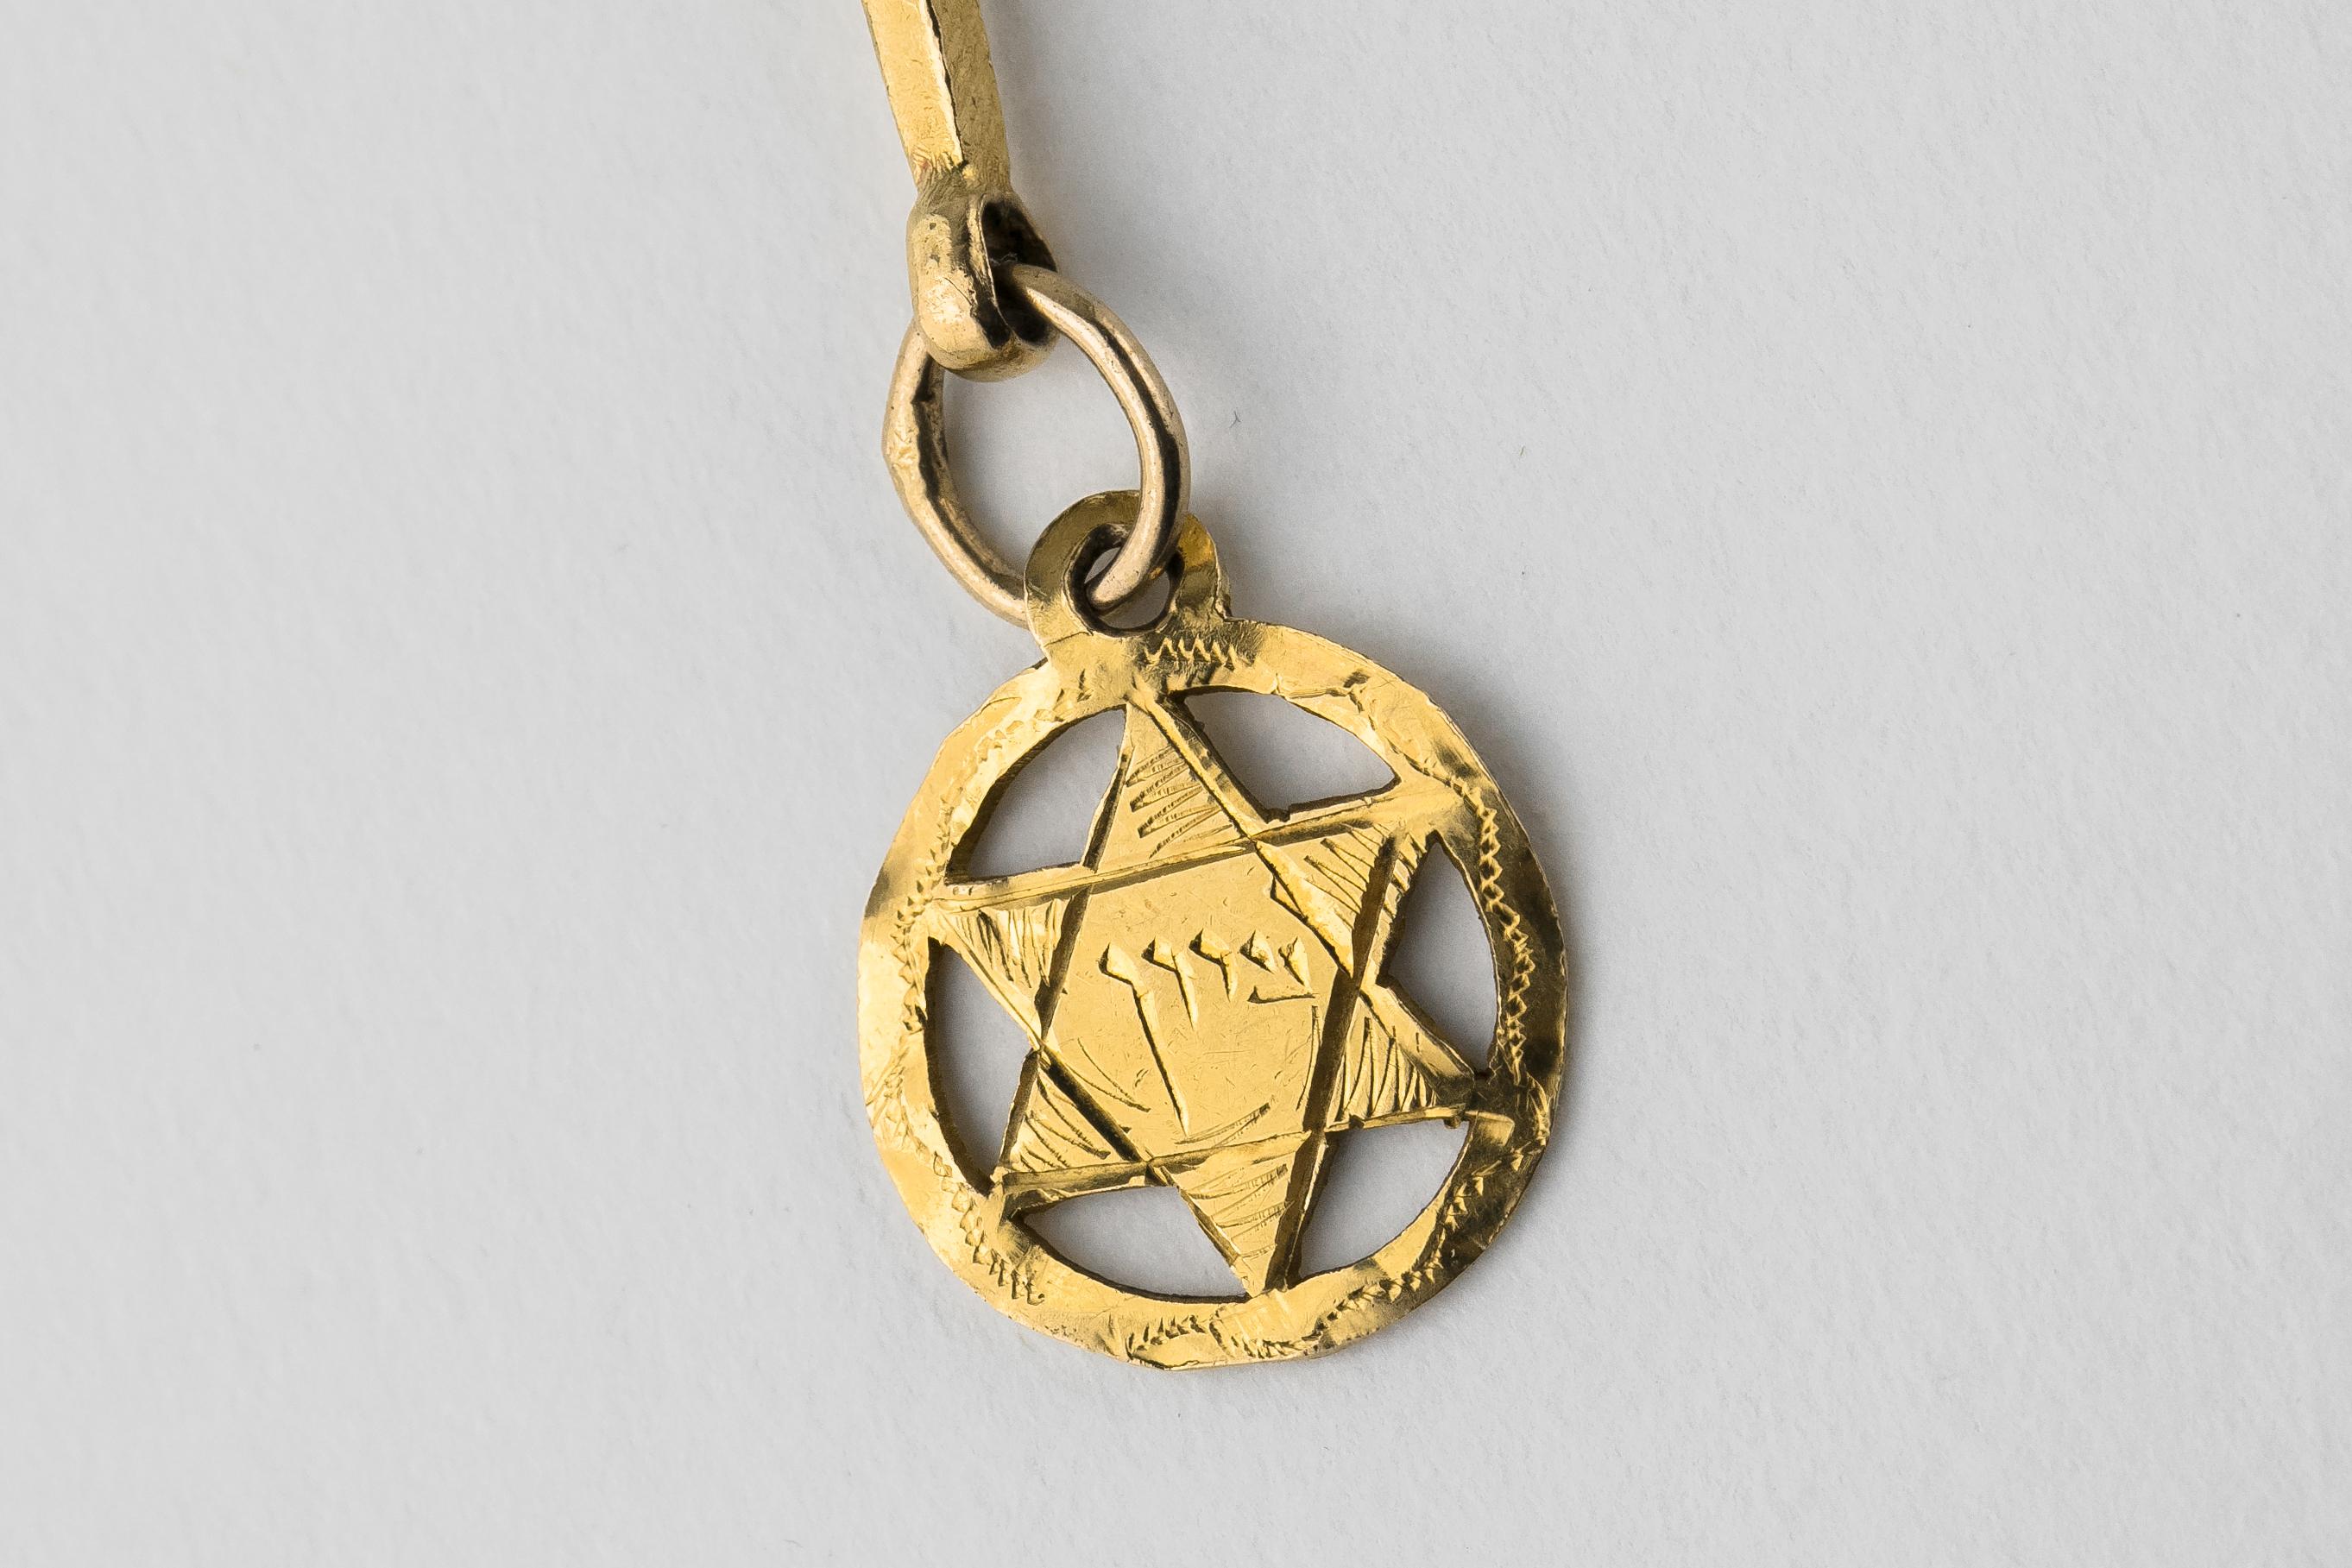 Handmade gold Torah pointer (Yad), India, circa 1900.
The flat part is hammered and engraved in Hebrew: Rivka M. and Avigael A. The shaft is twisted.
An open work gold medallion with Star of David engraved with the Hebrew word Zion is hanging from